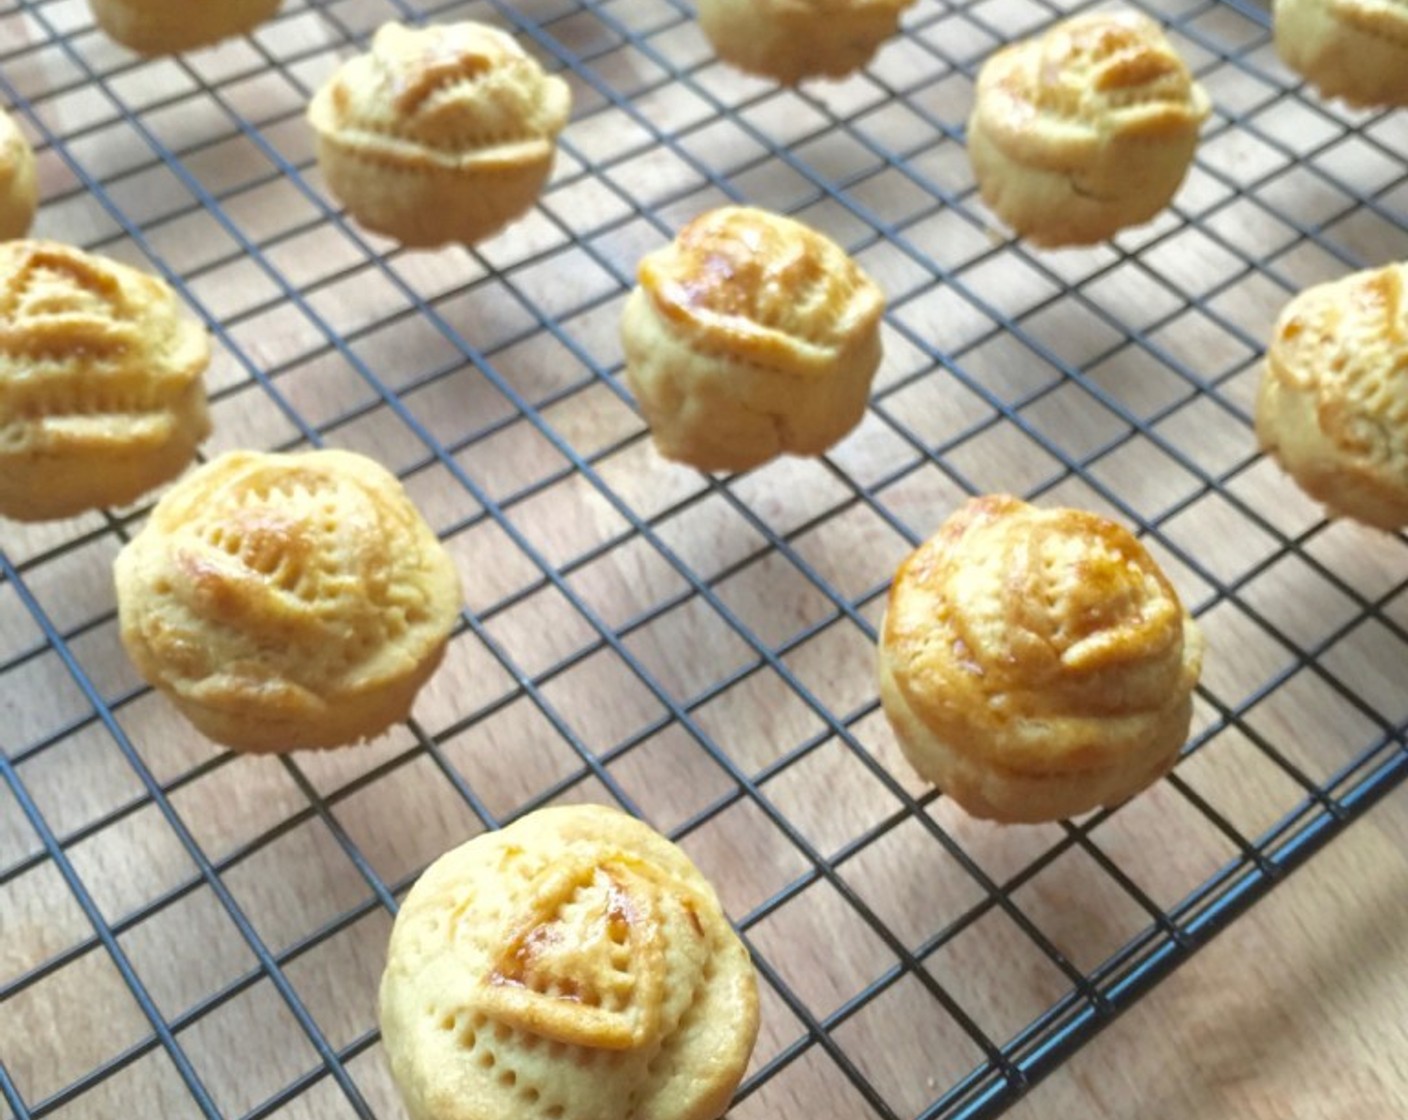 step 22 Transfer the baked pineapple tarts to cool completely on wire rack before storing in airtight containers.